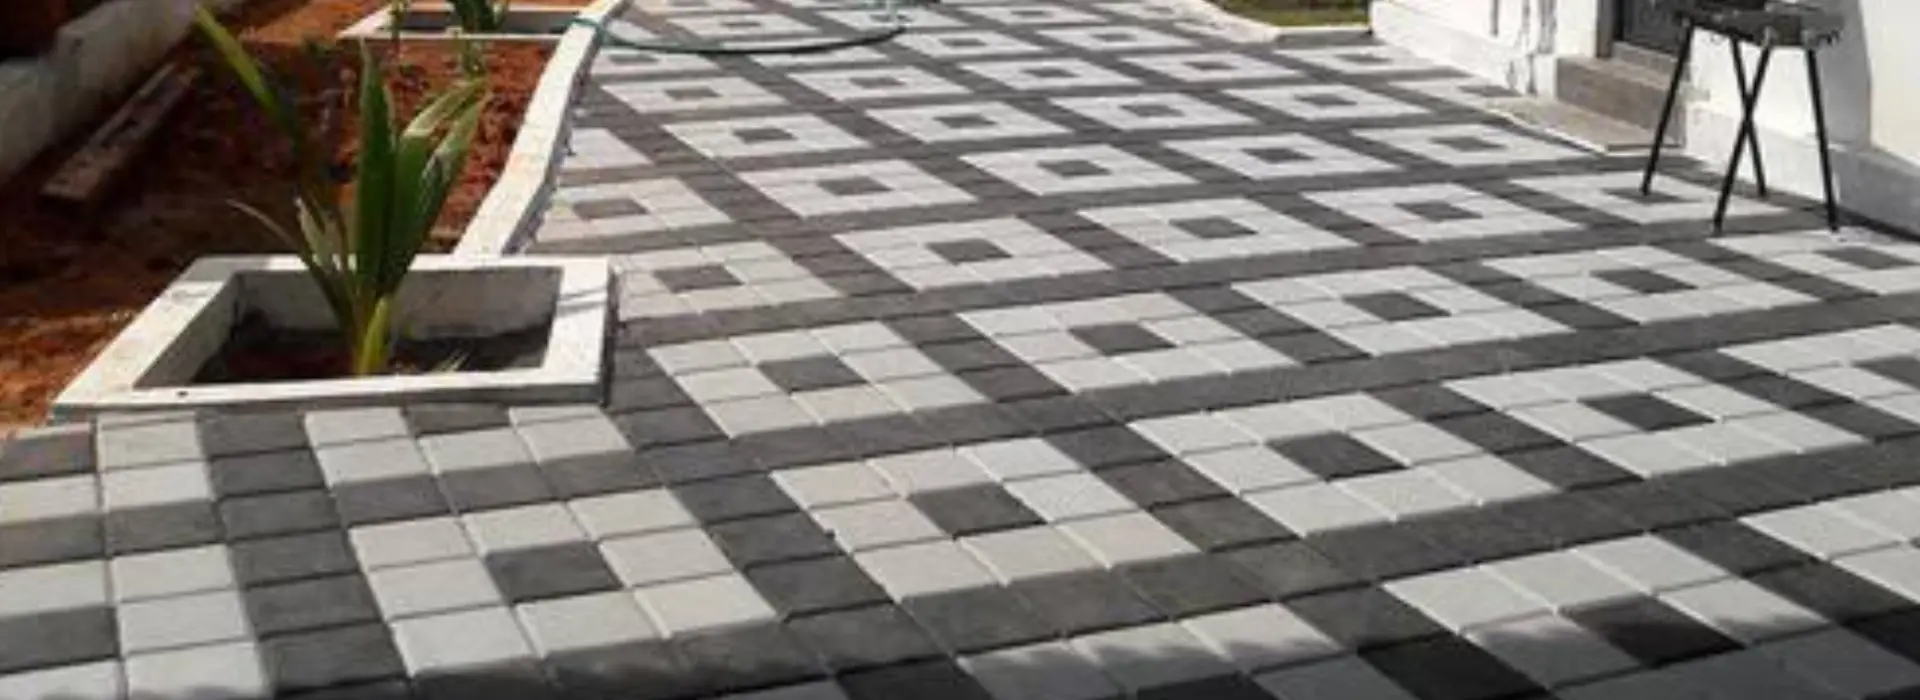 Residential Paver Block manufacturers in Chennai